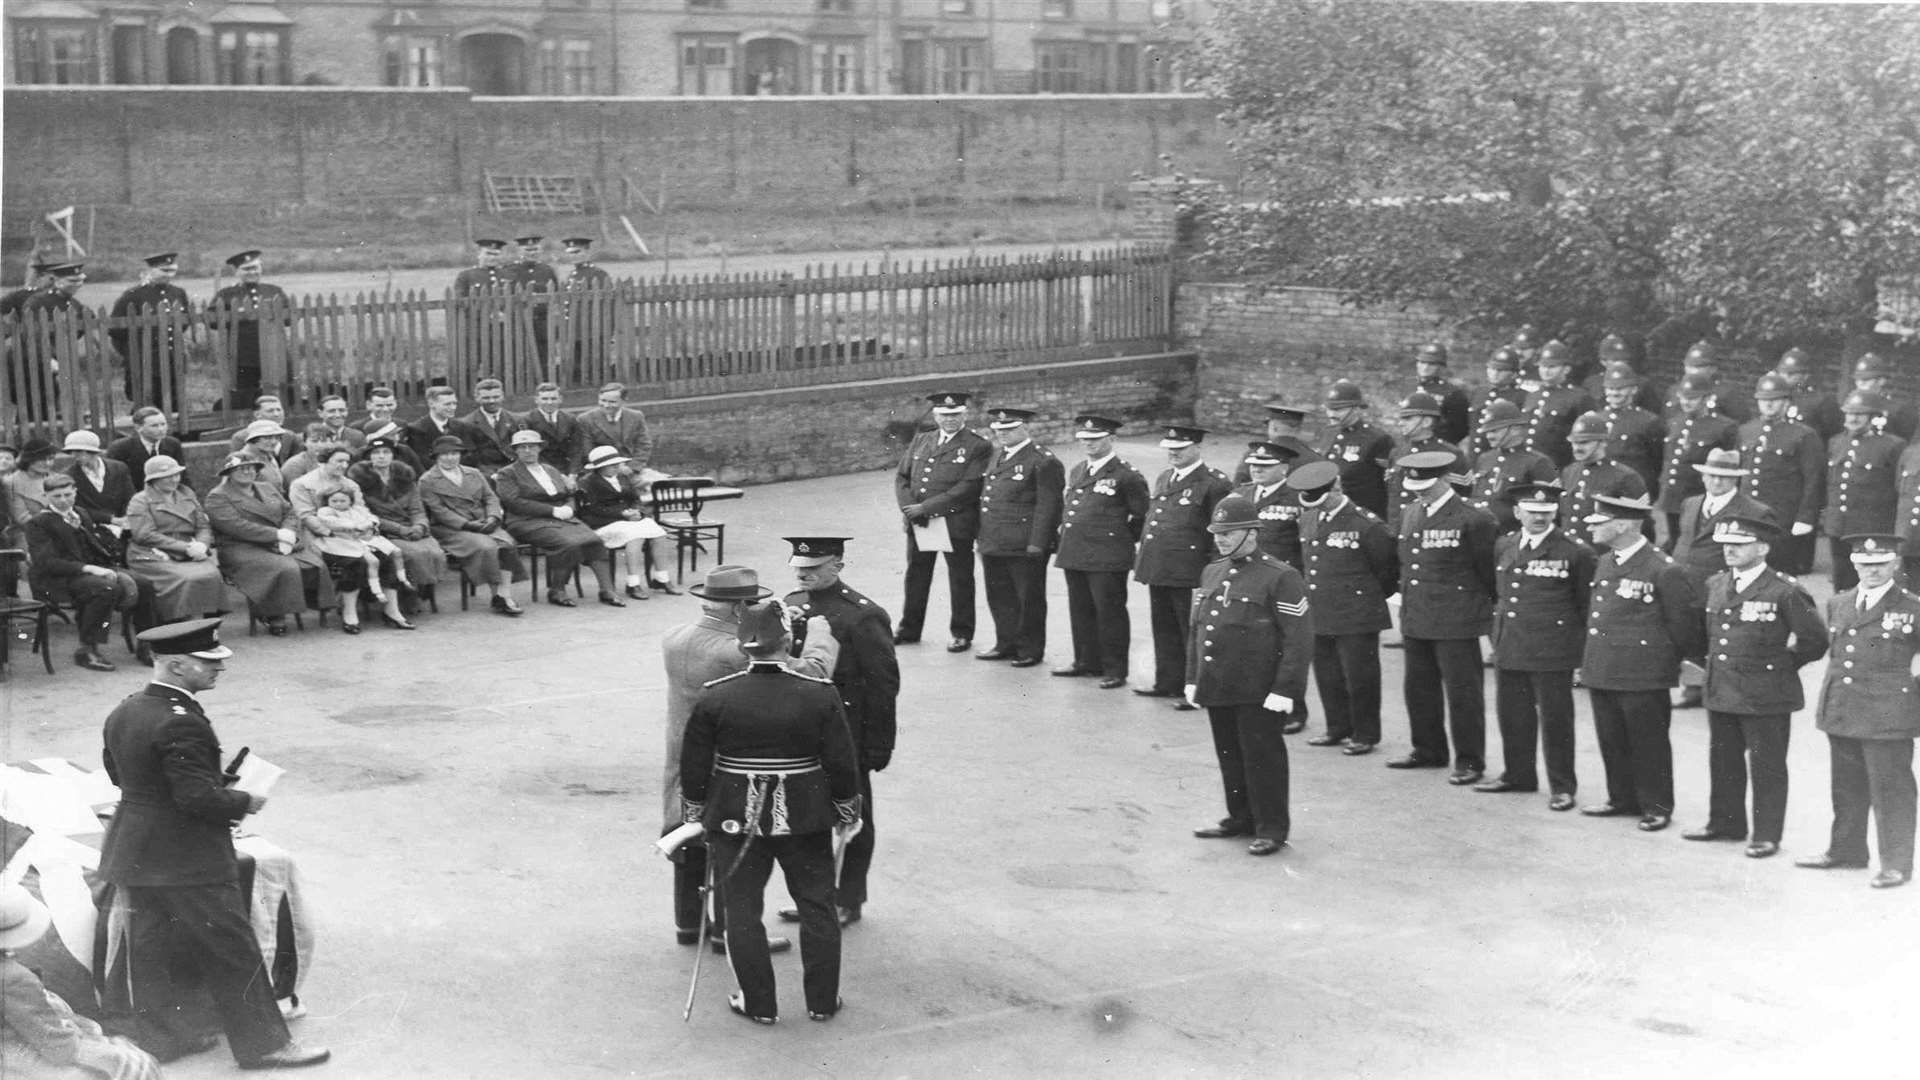 Kent police officers receive medals to mark the Silver Jubilee of King George V in a ceremony at Wrens Cross, Maidstone, in May 1935